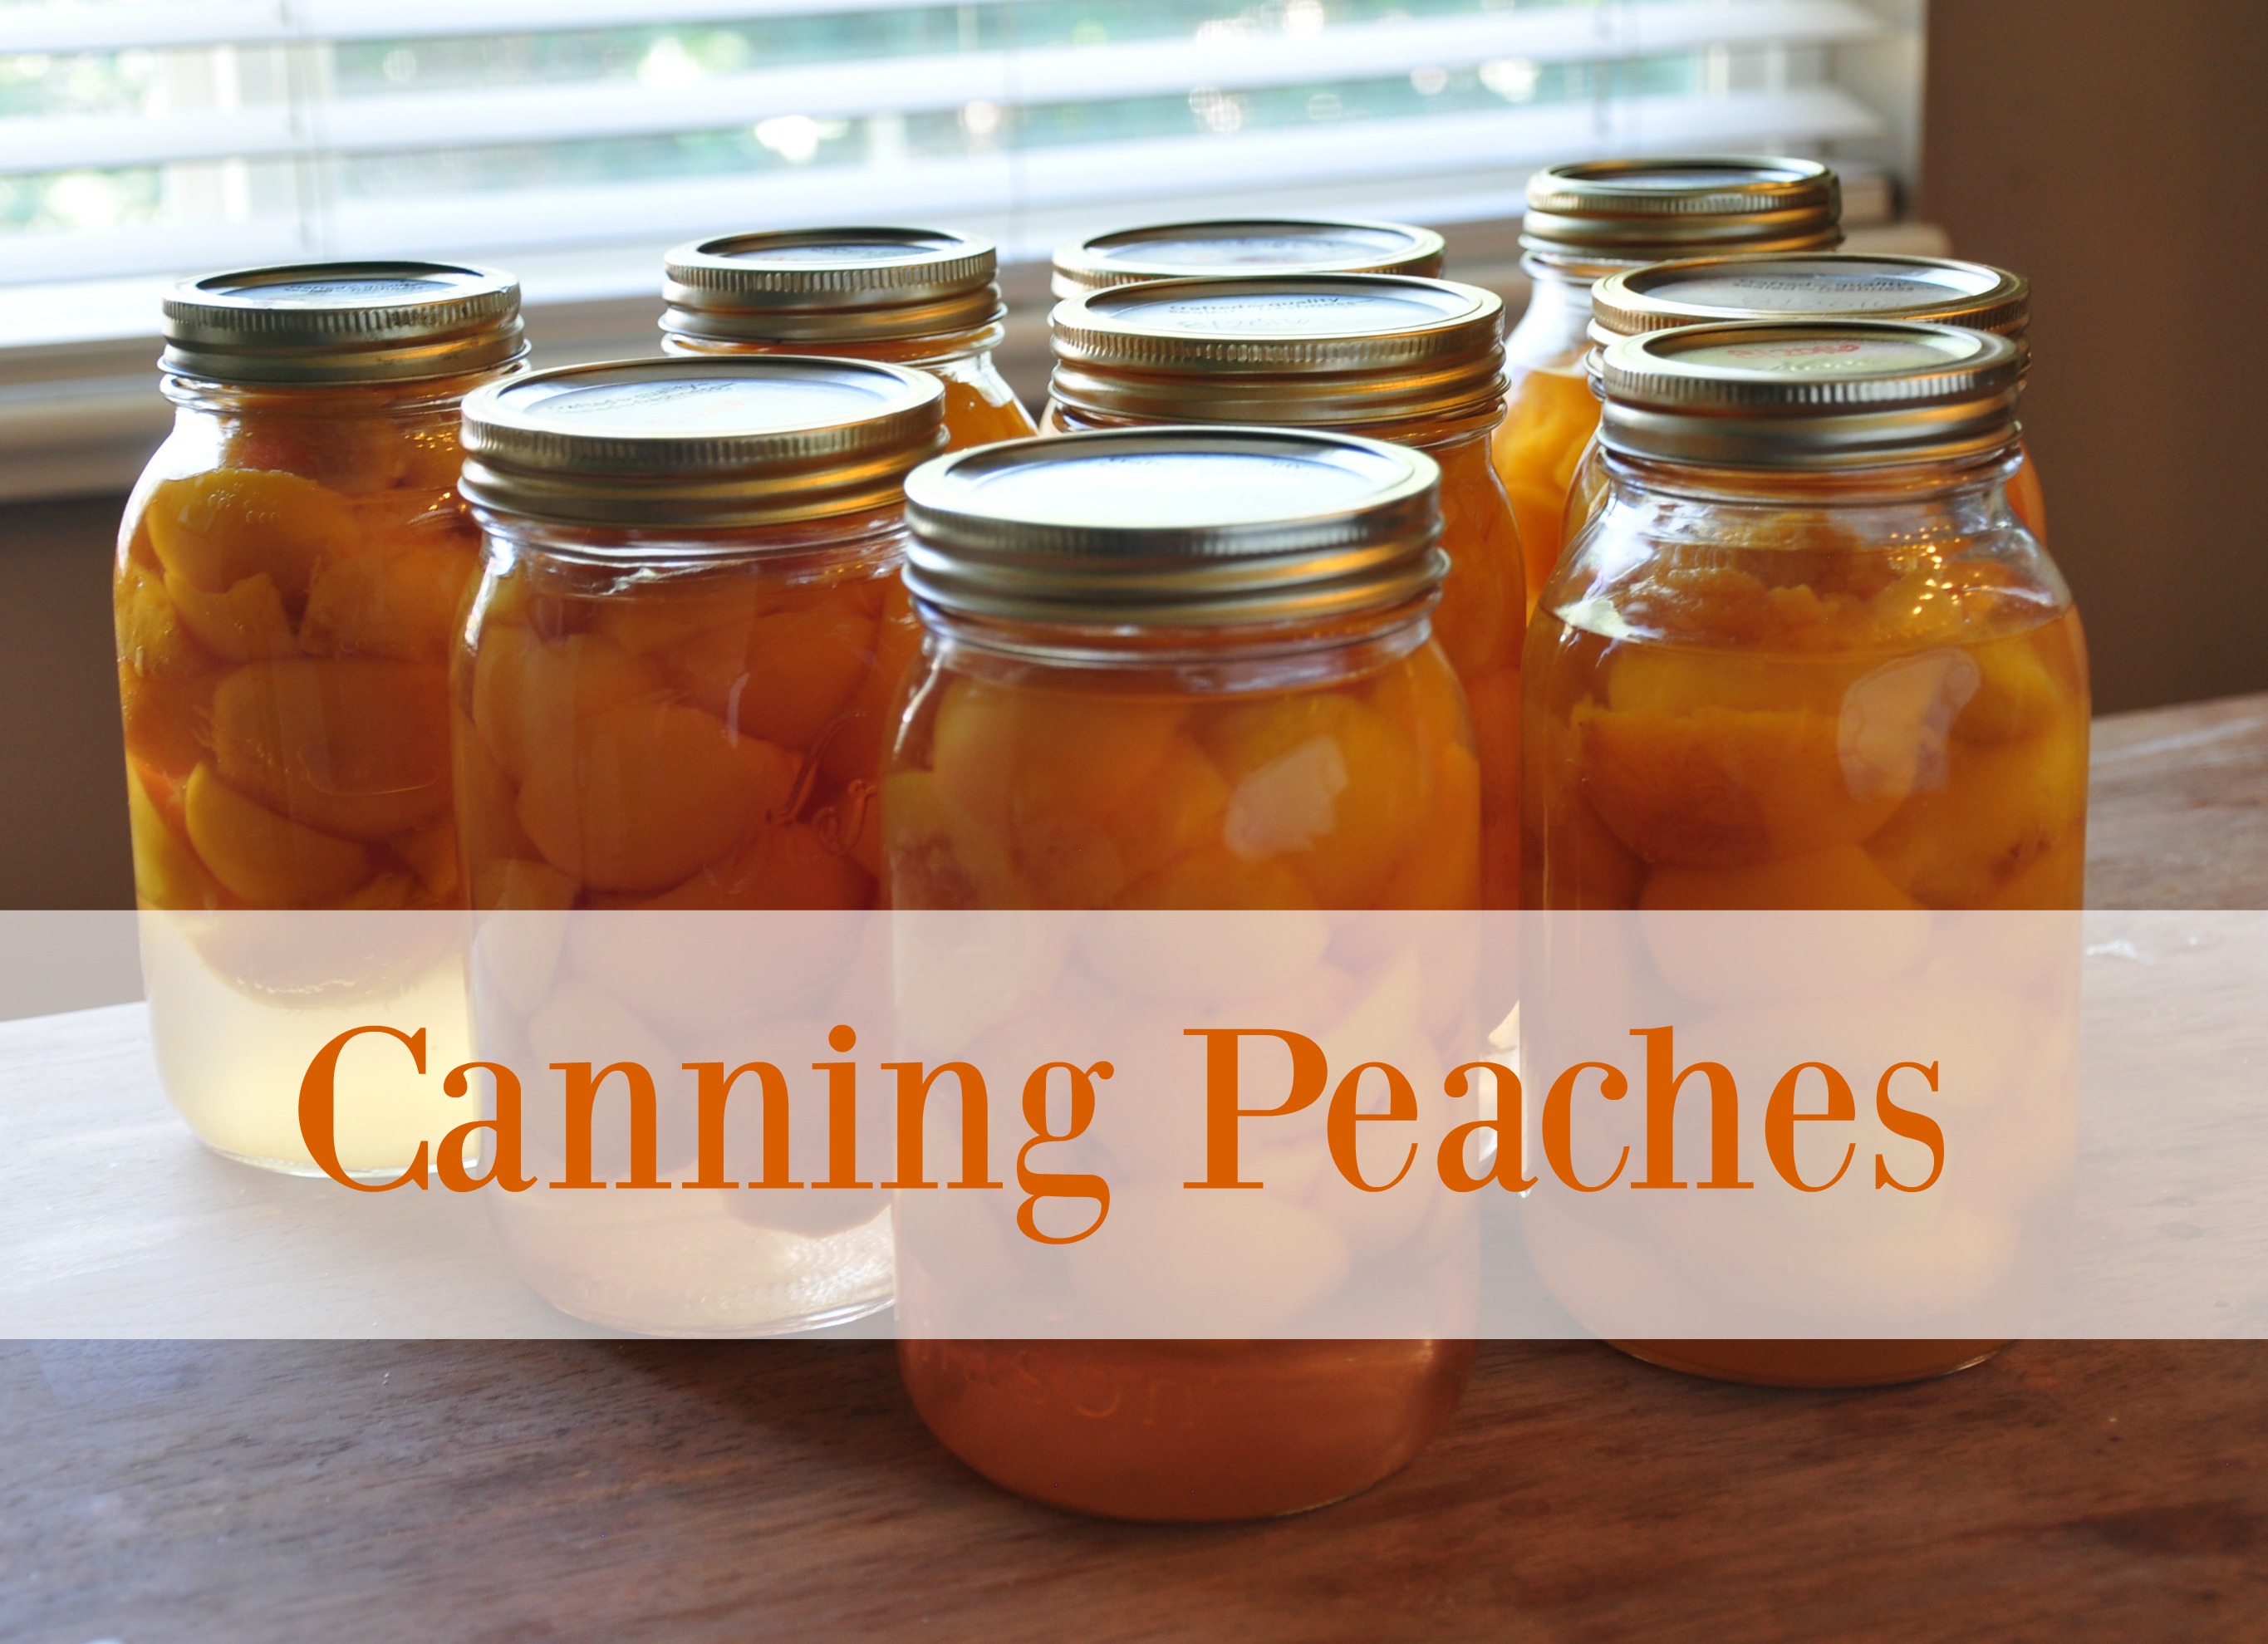 How to Can Peaches! Become More Self-Sufficient With These Step By Step Instructions!